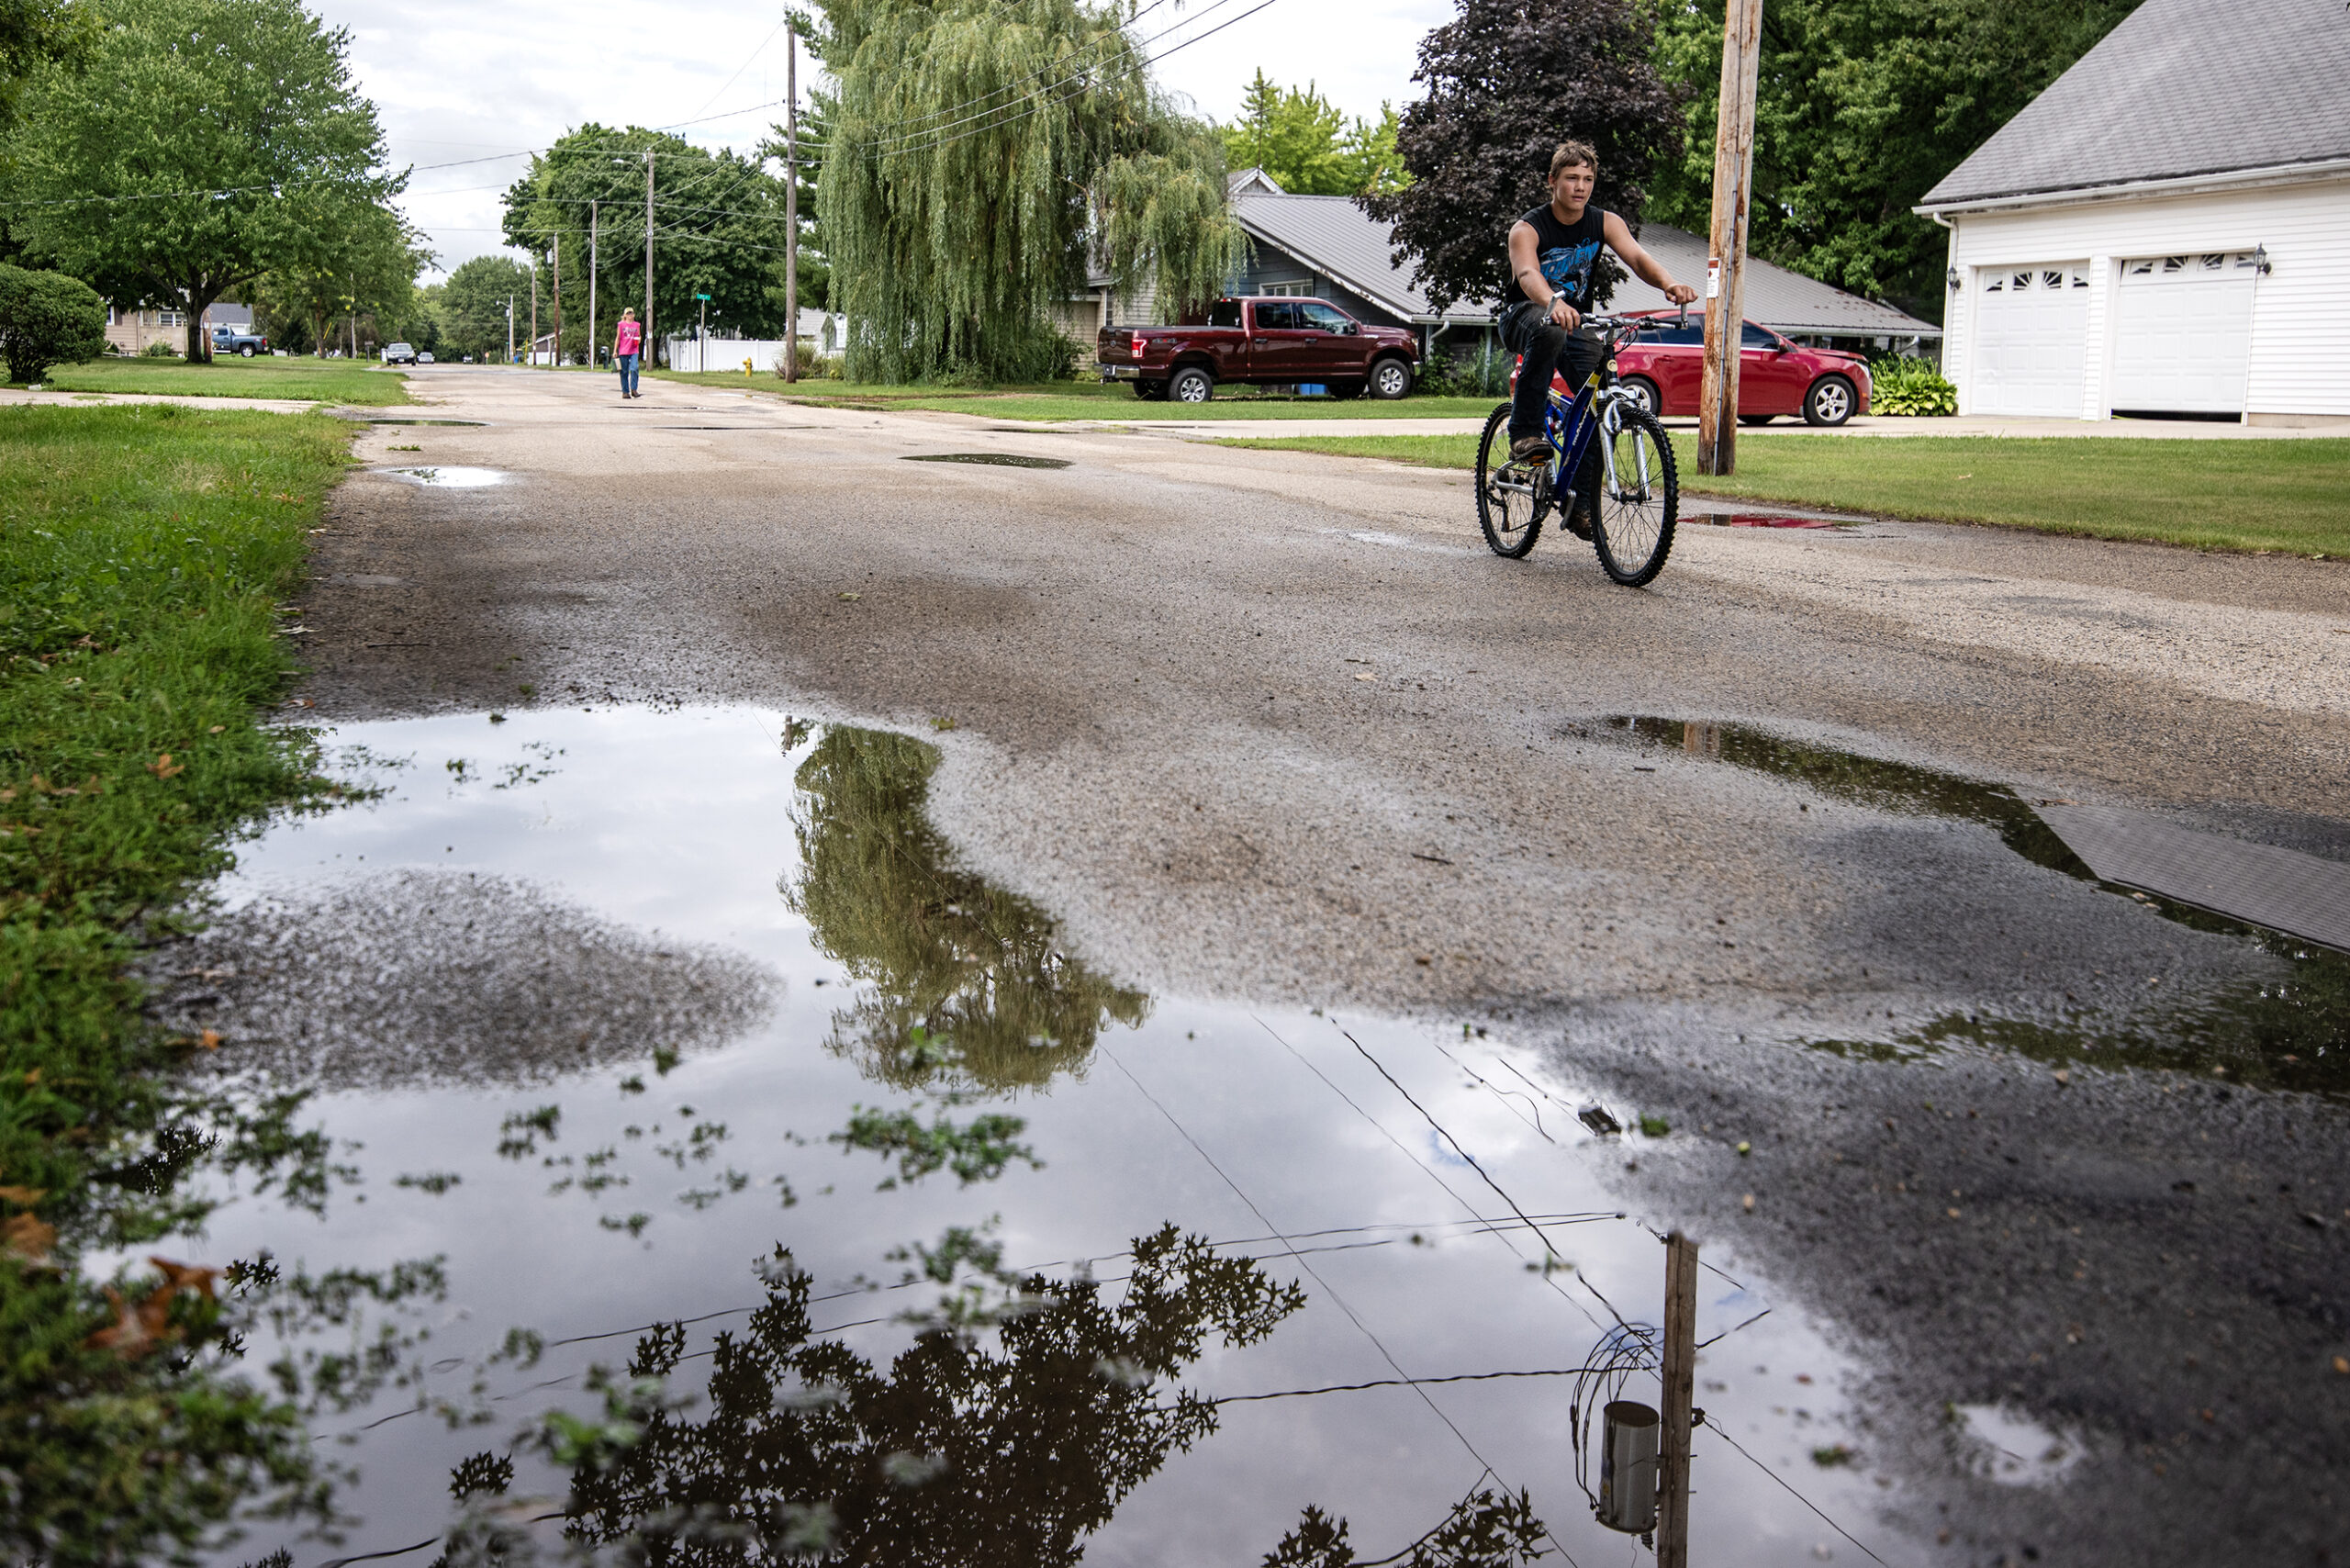 The reflection of trees can be seen in a puddle as a bicyclist passes by.